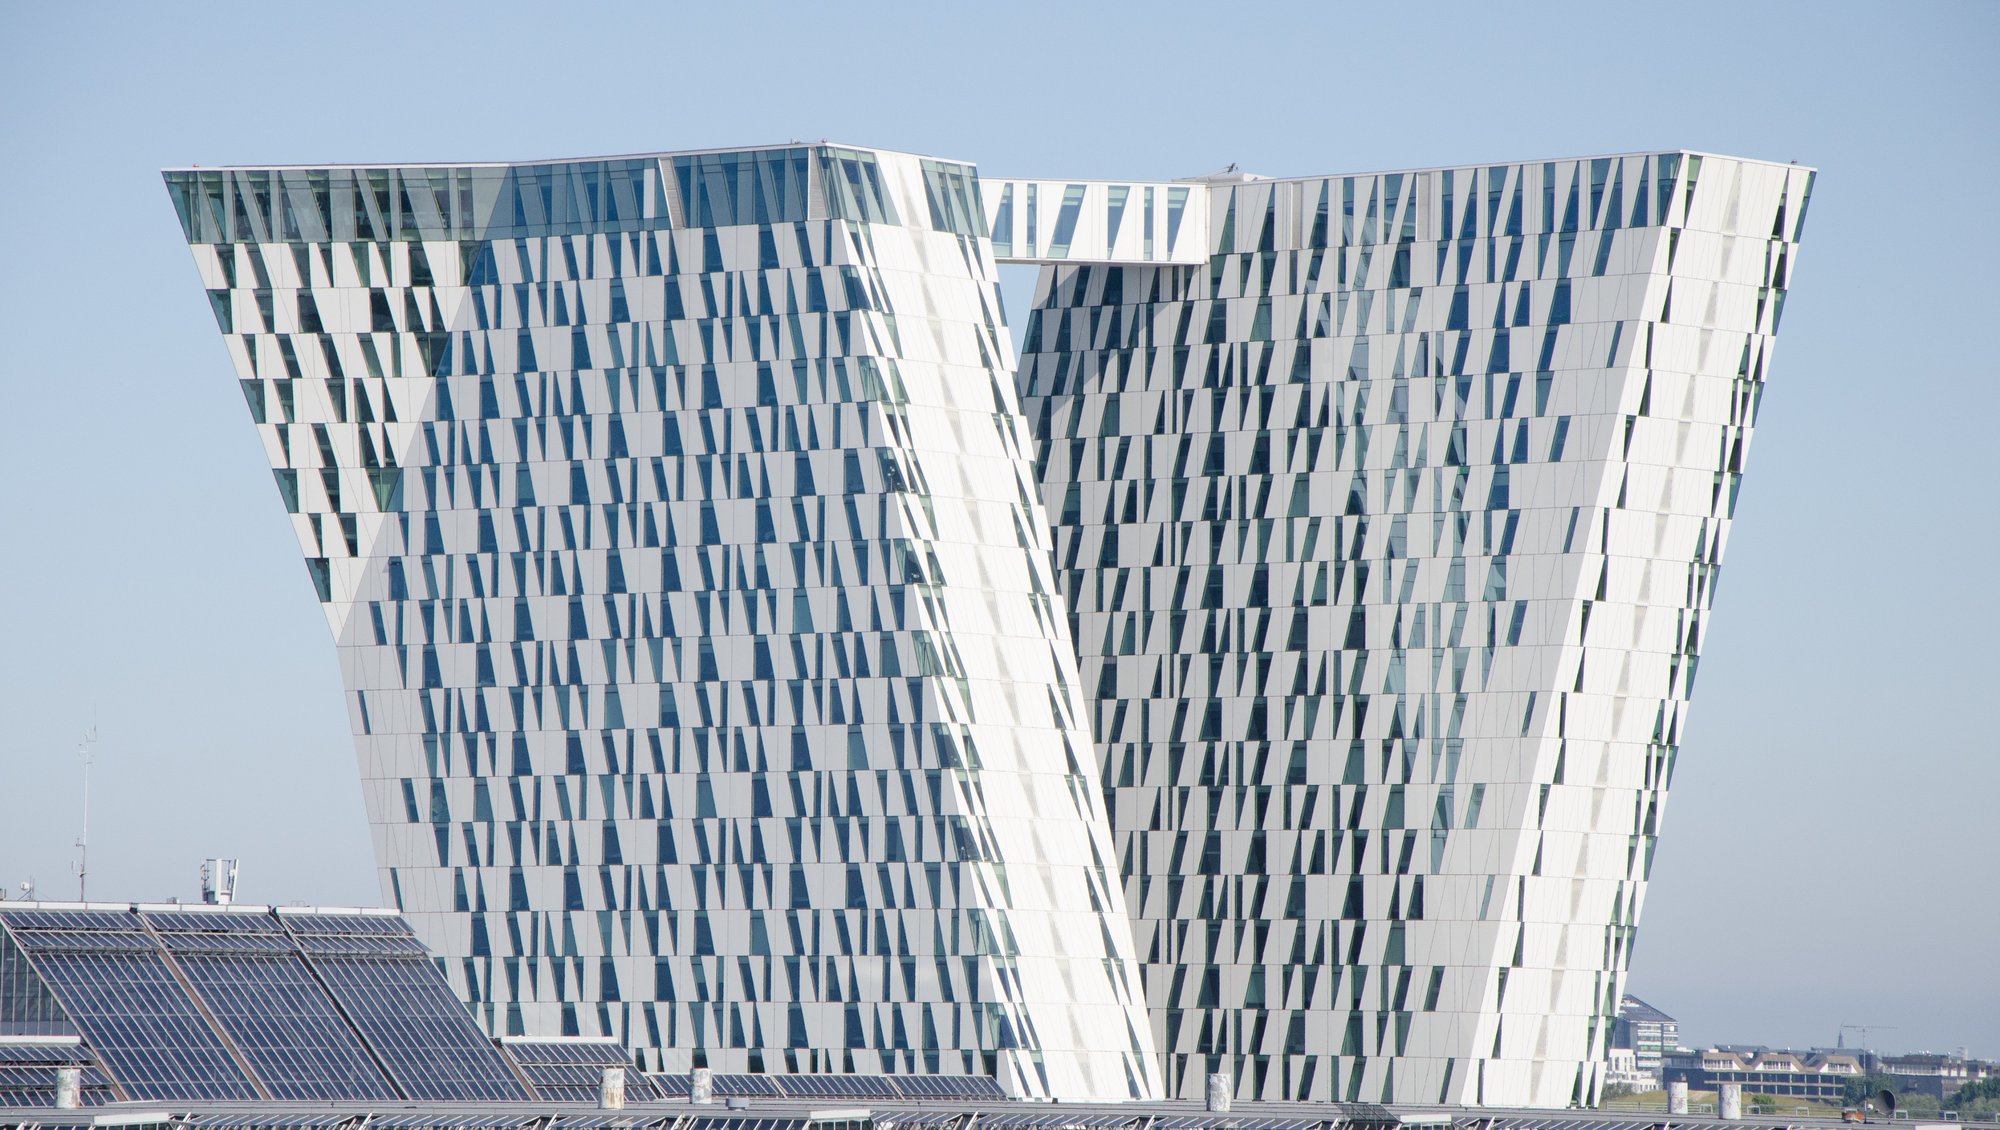 A powerful expressive work with two inclined and faceted towers connected by a sky bridge. The buildings are trapez shaped and made with white plates and glass